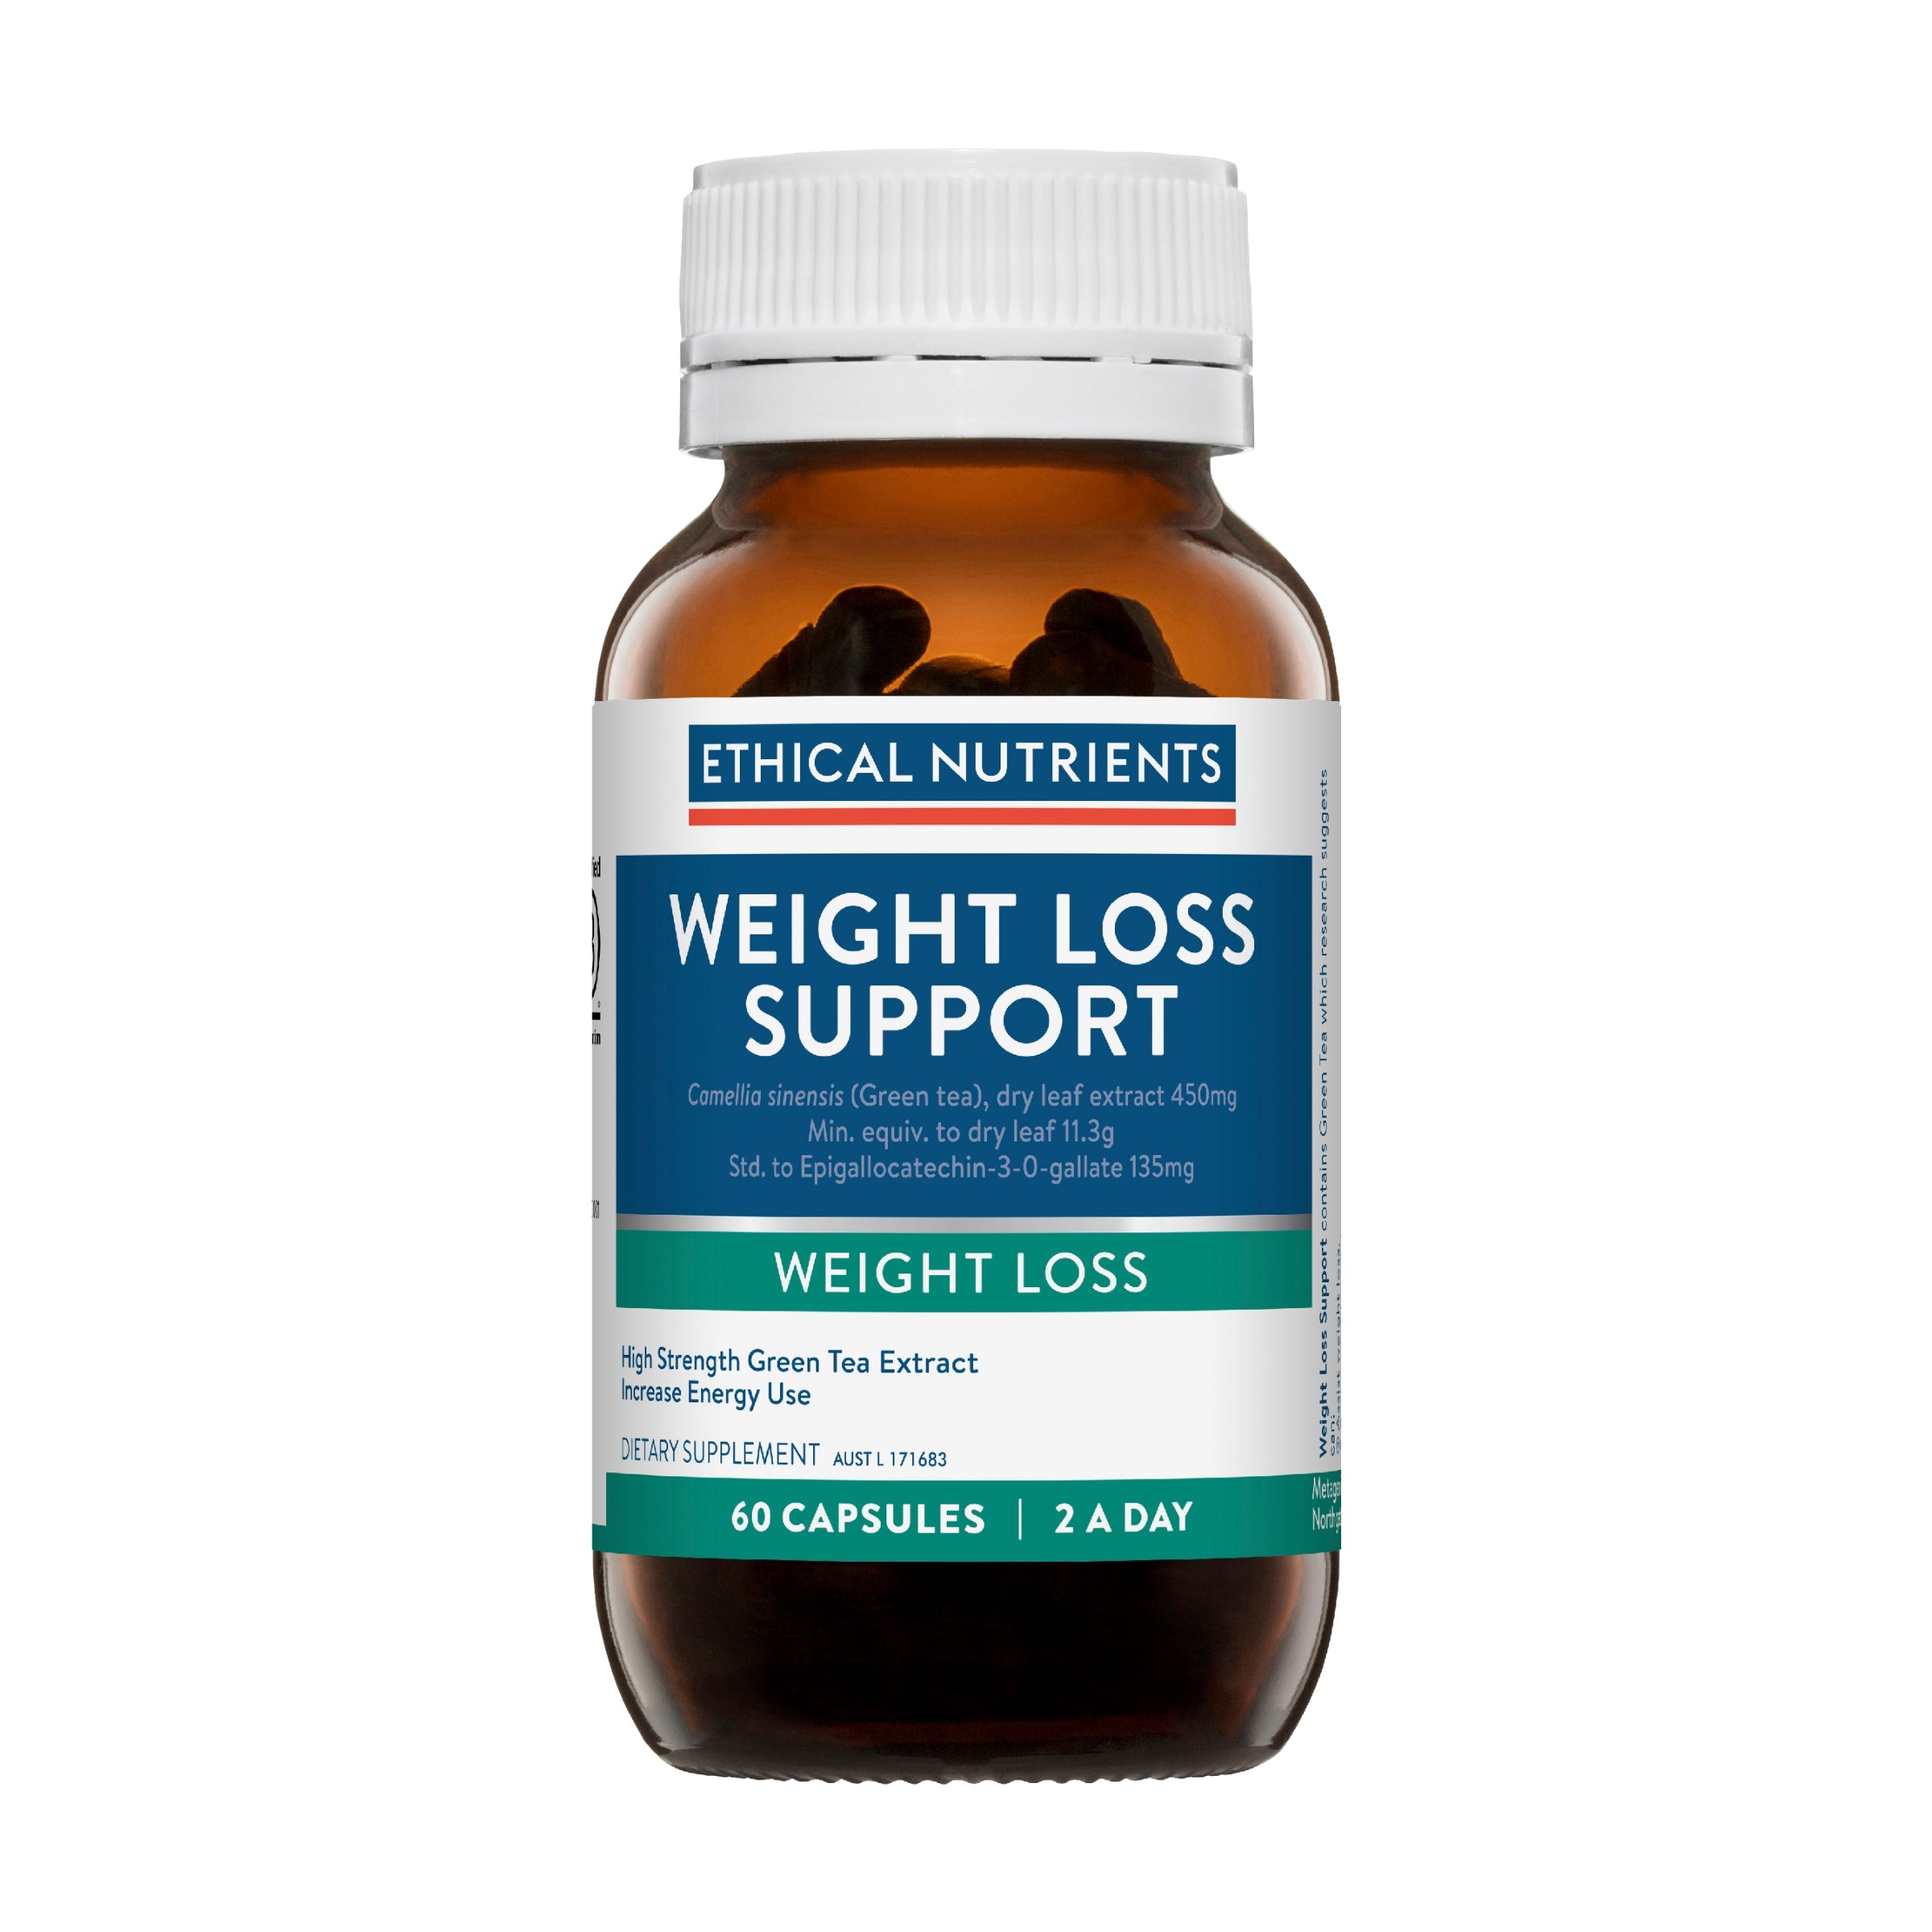 Ethical Nutrients Weight Loss Support 60 Capsules #size_60 capsules